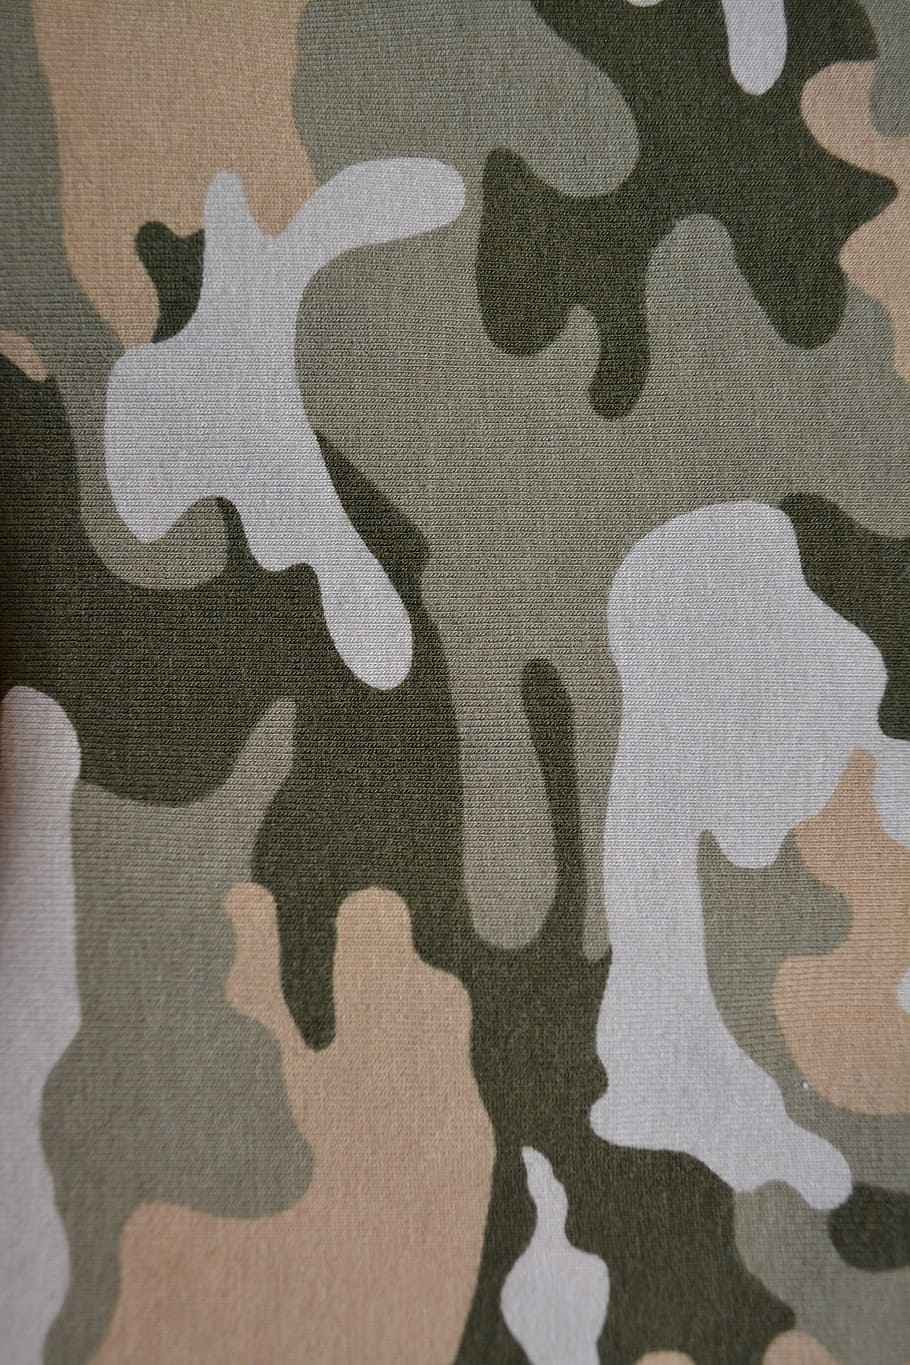 gray, black, camouflage textile, pattern, camouflage, military, uniform, texture, textured, combat